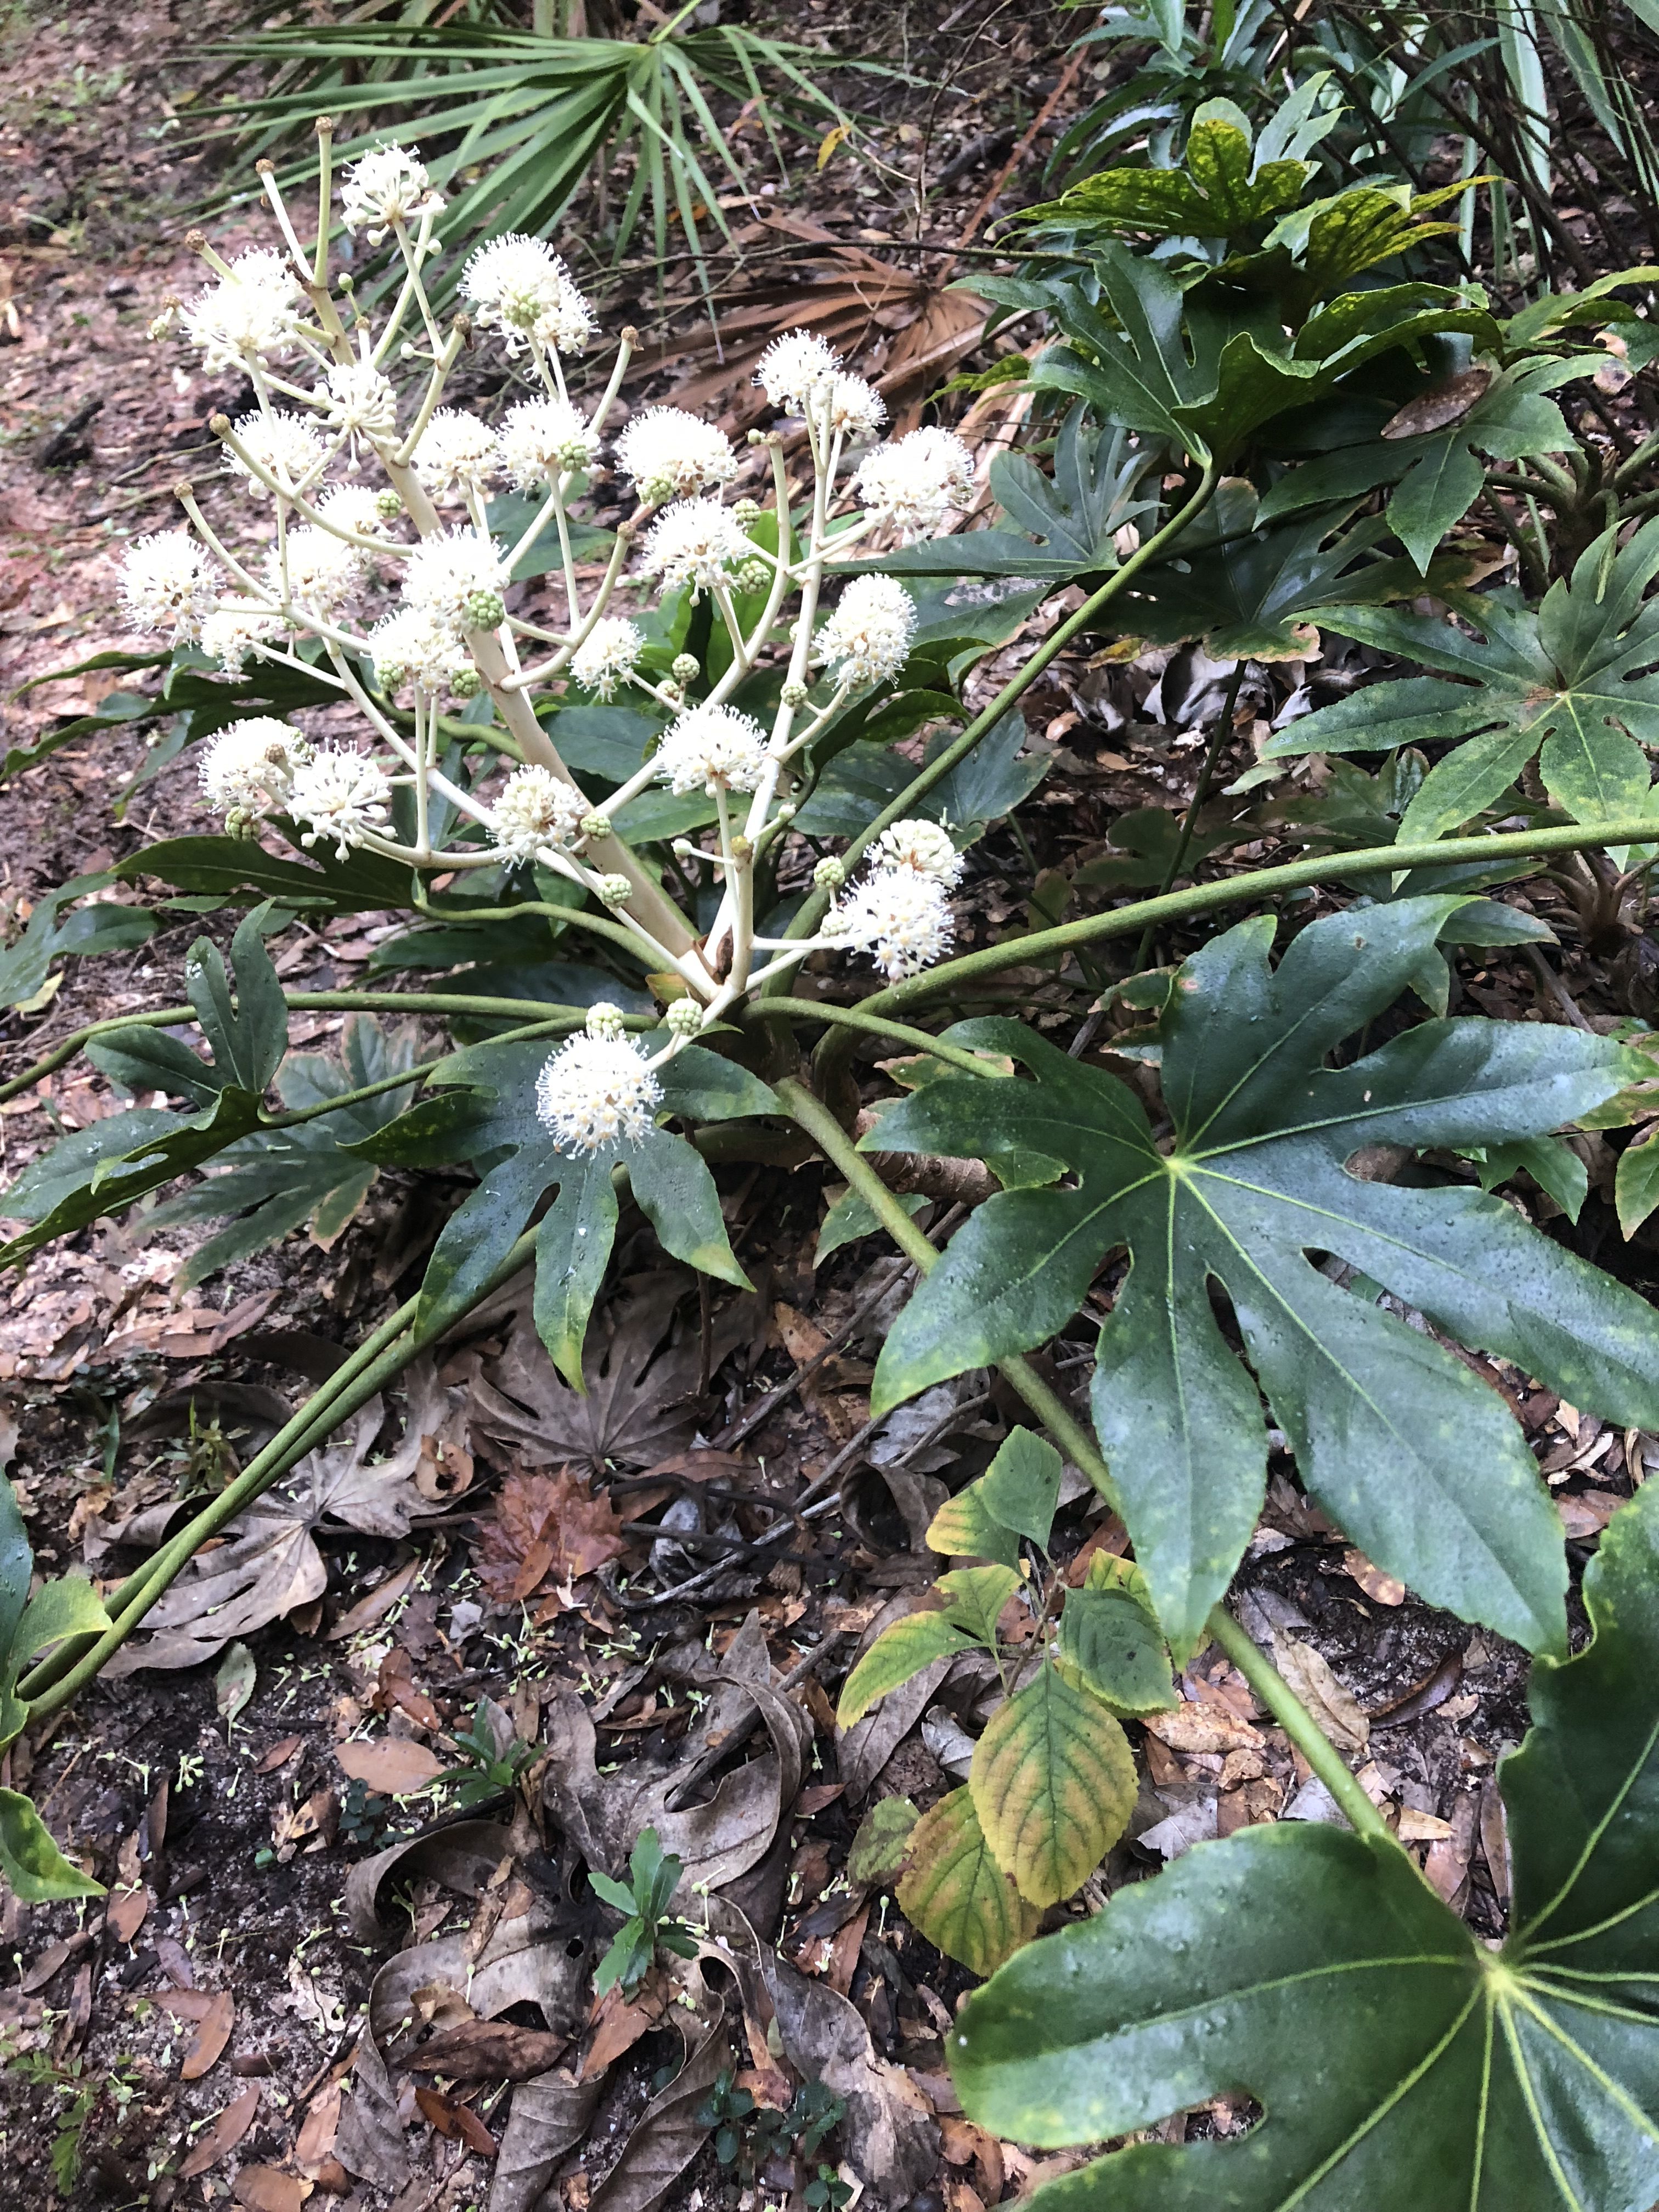 Image of Fatsia japonica flowers in full bloom